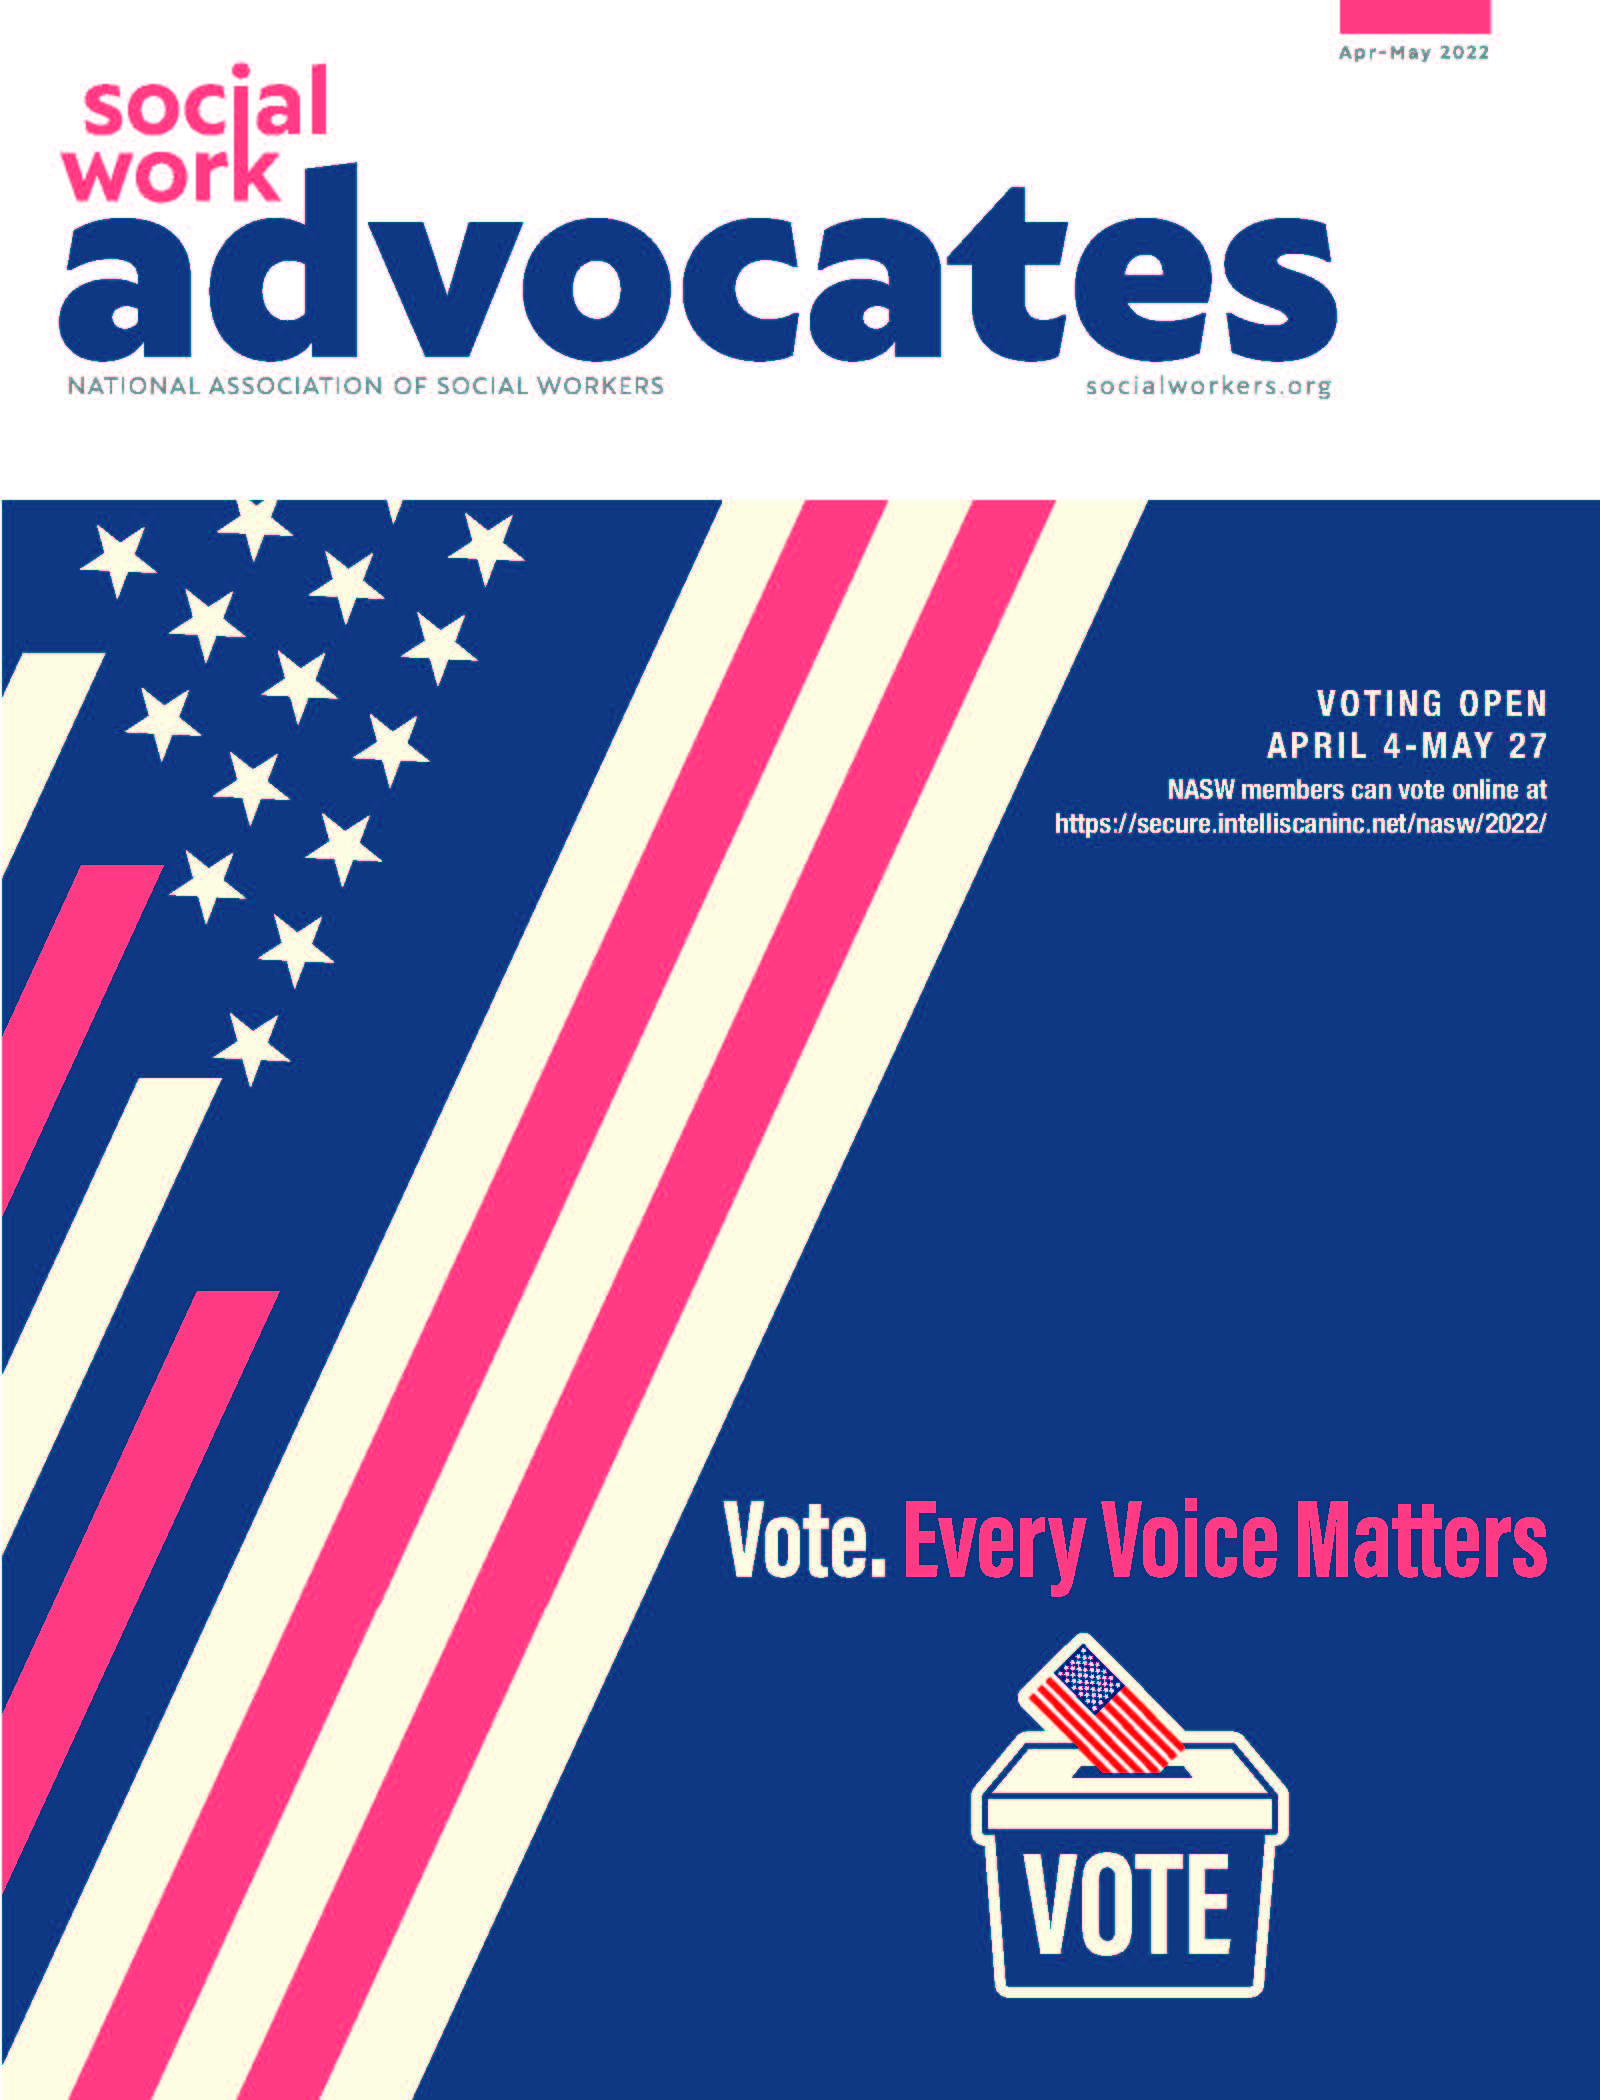 Social Work Advocates, Vote, every voice matters, Voting open April 4 - May 27